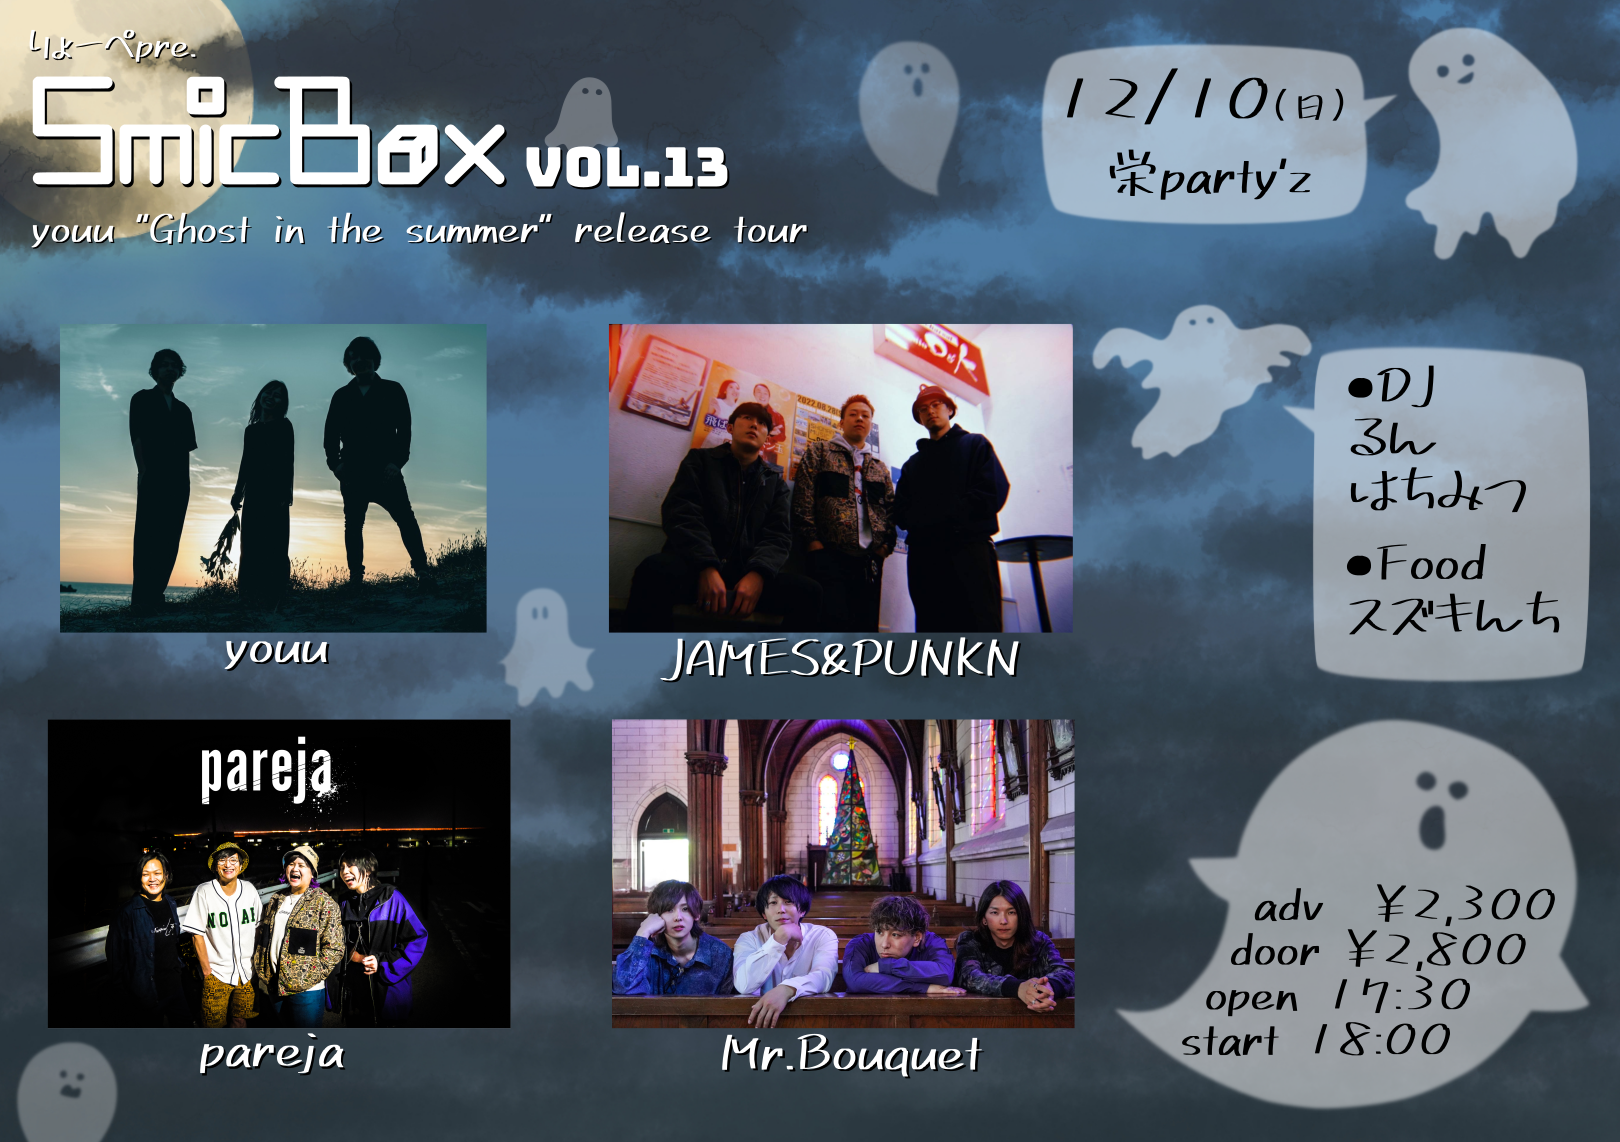 Smic Box vol.13 youu "Ghost in the summer" release tour